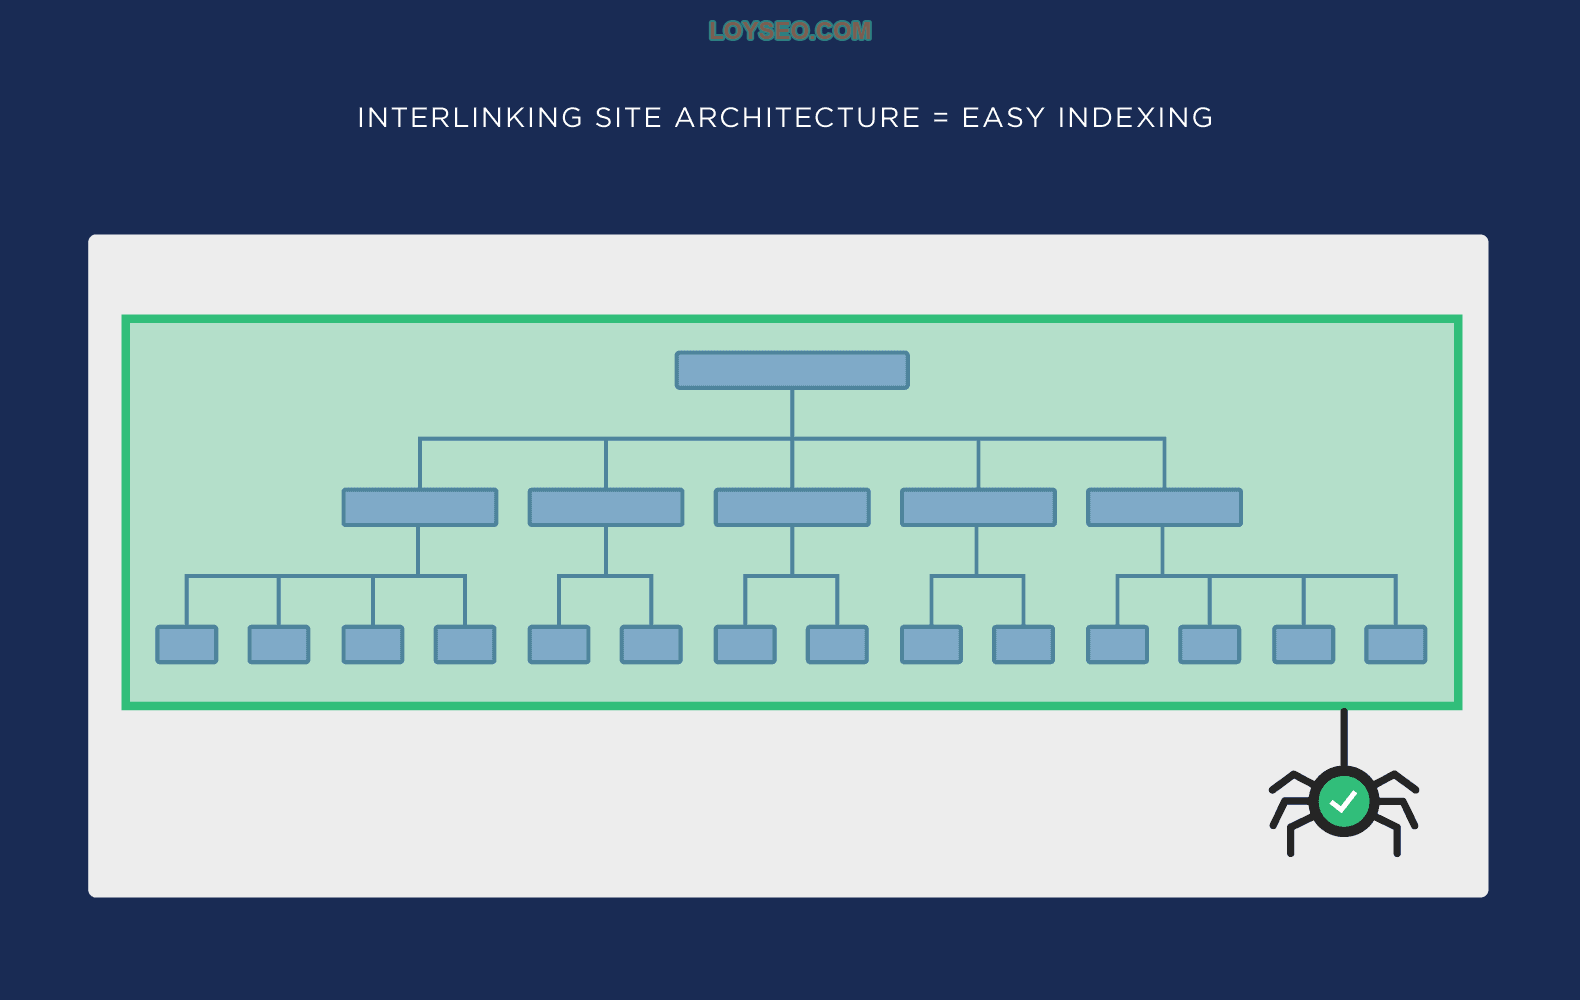 Interlinking site architecture = Easy indexing